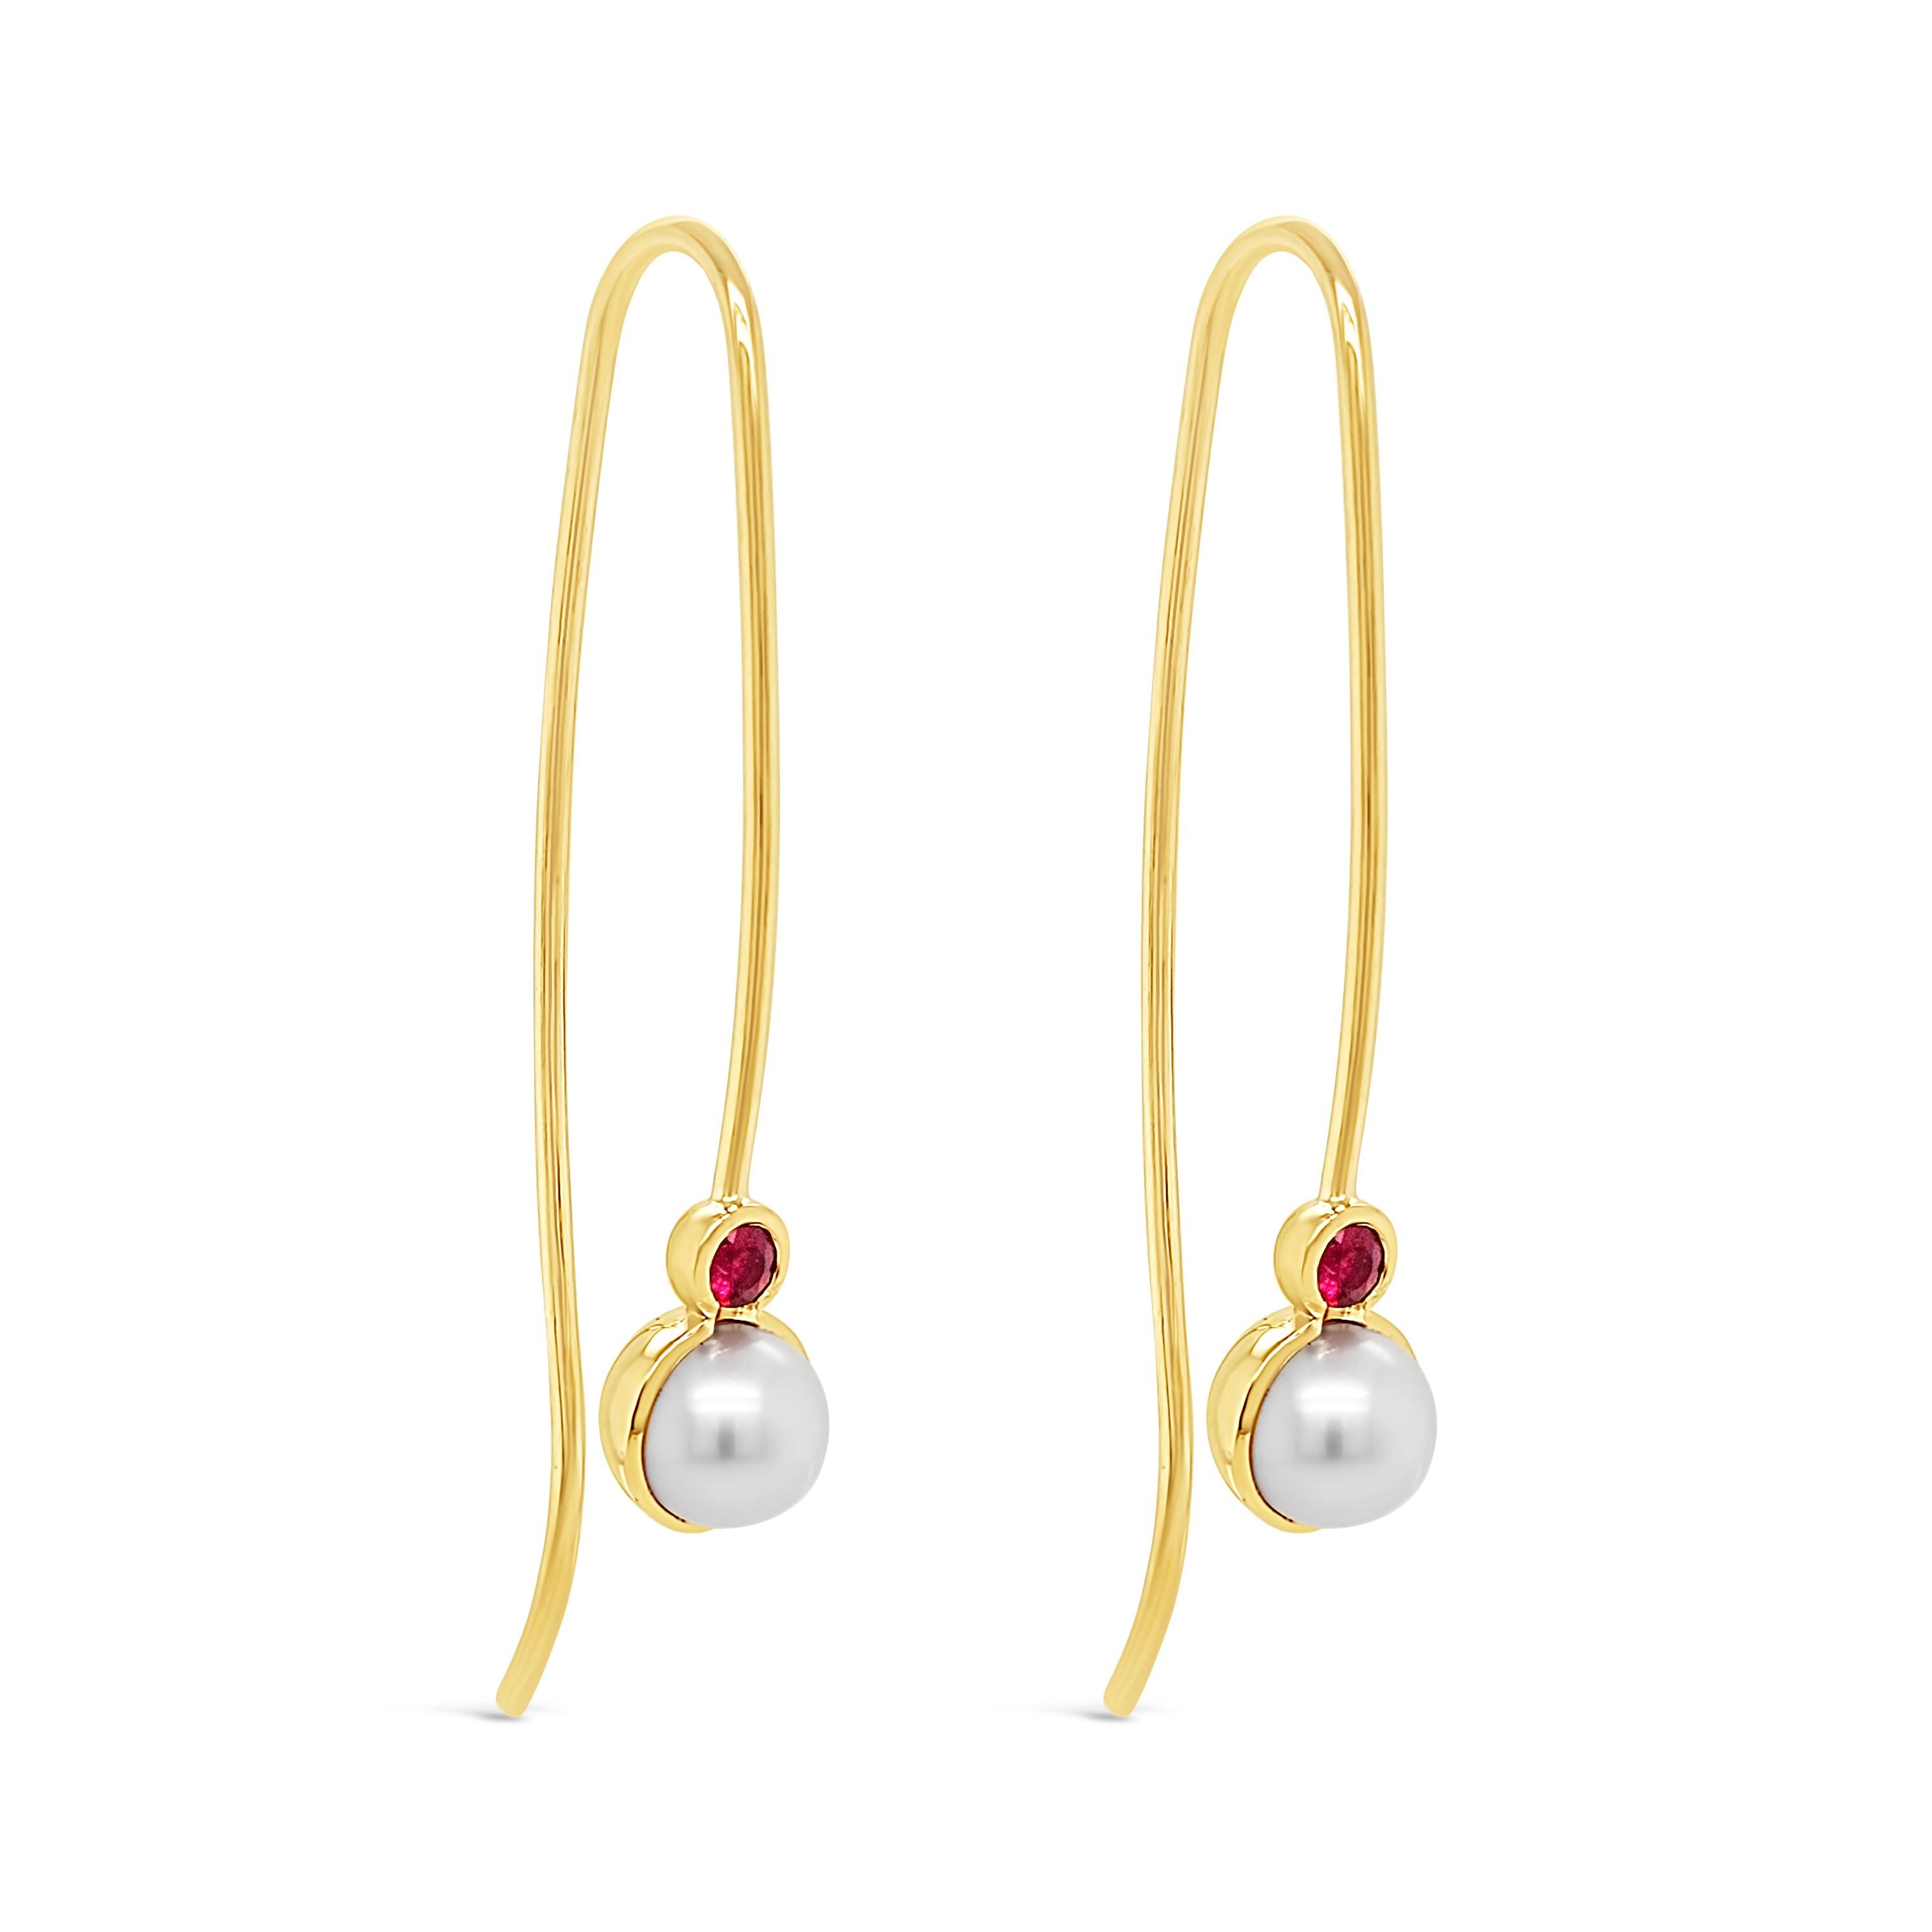 Artisan 18ct Yellow Gold & Pearl Earrings Featuring Rubies 